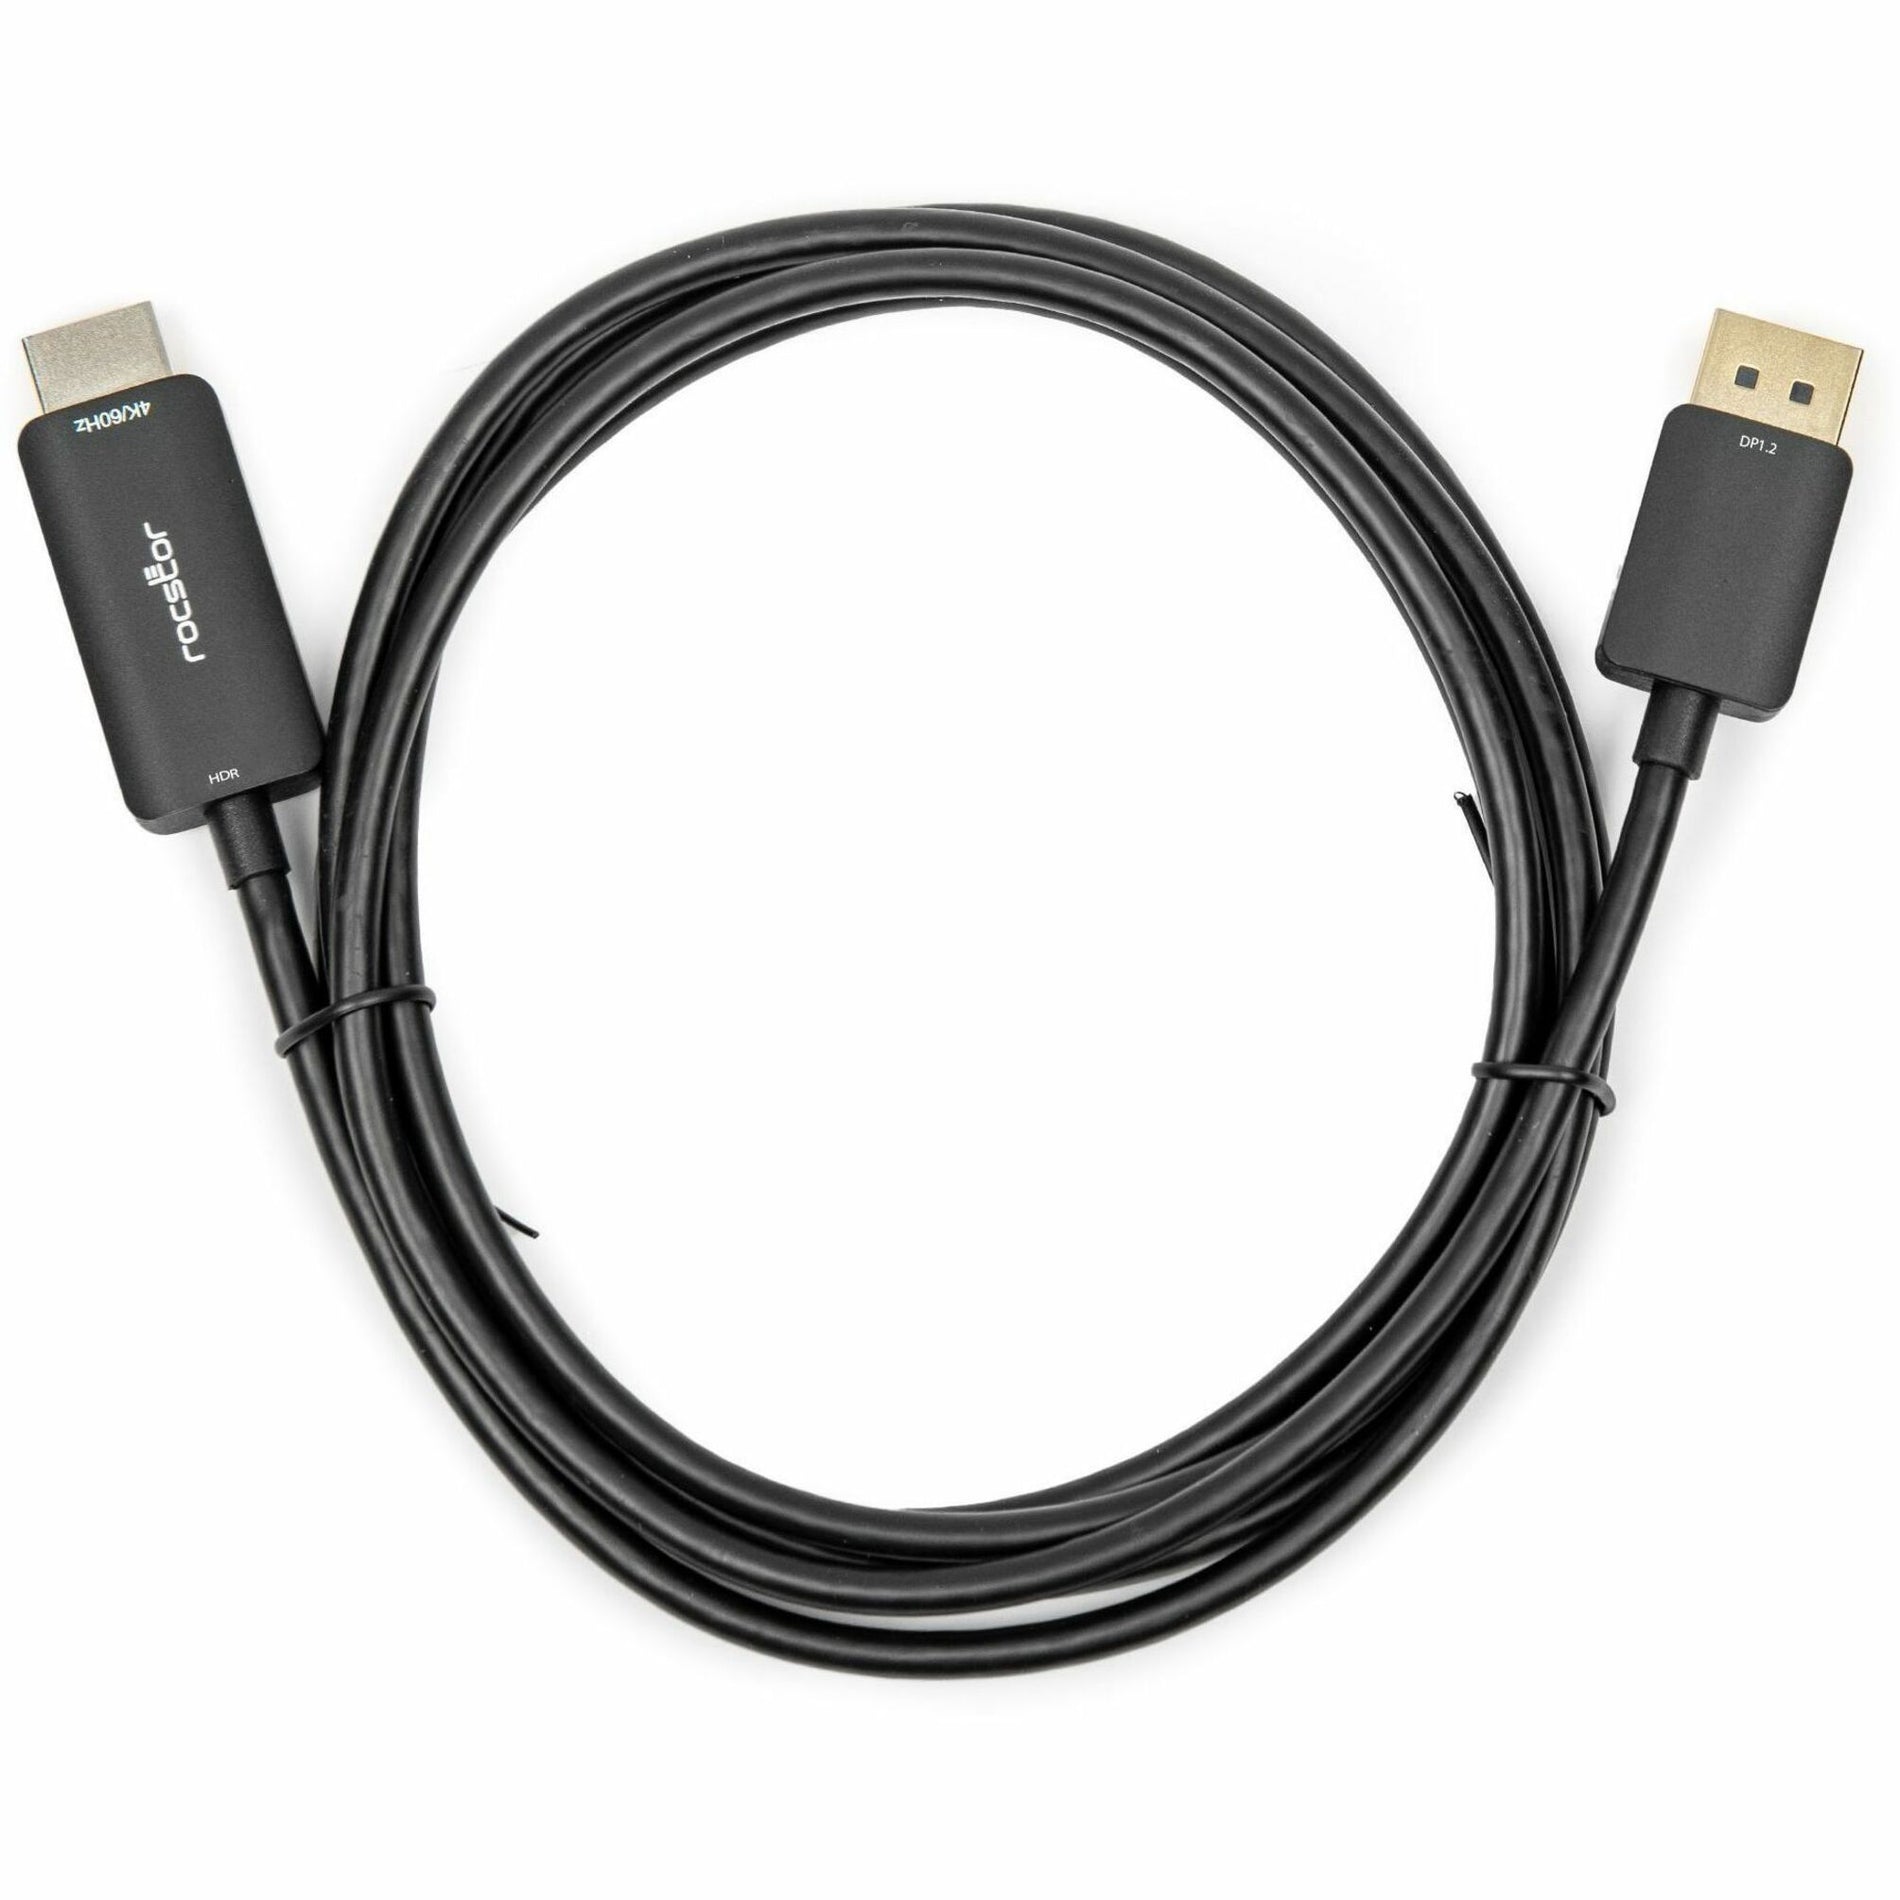 Rocstor Y10C127-B2 DisplayPort/HDMI Audio/Video Cable, 6 ft, Gold-Plated Connectors, 4K Supported